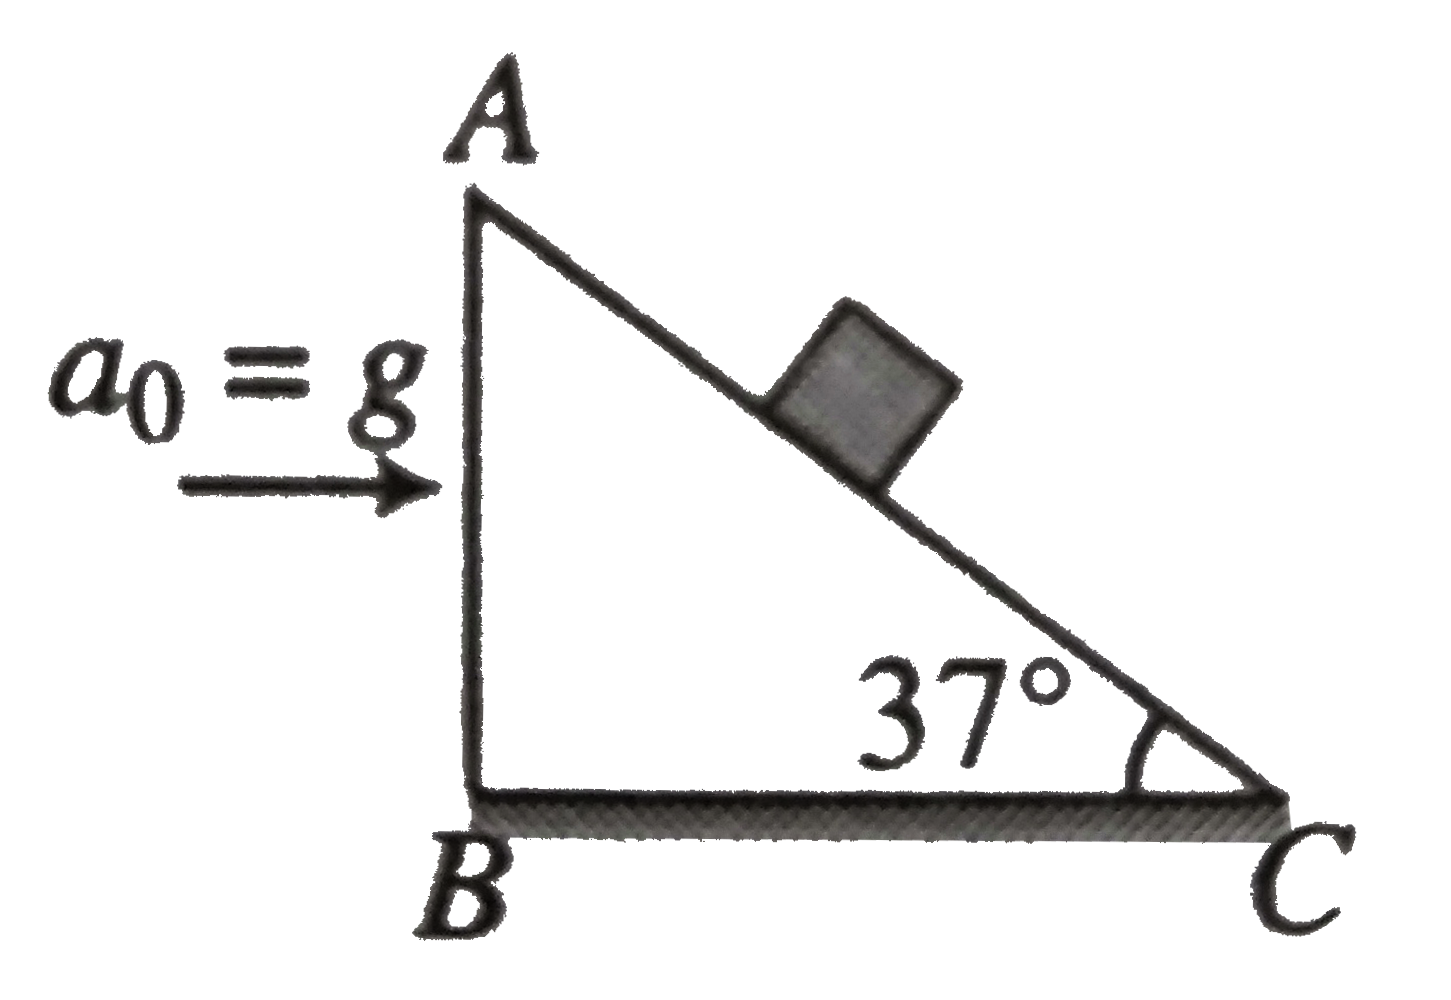 A block is placed on an inclined plane moving towards right horizontally with an acceleration a(0)=g. The length of the plane AC=1m. Friction is absent everywhere. Find the time taken (in seconds) by the block to reach from C to A.